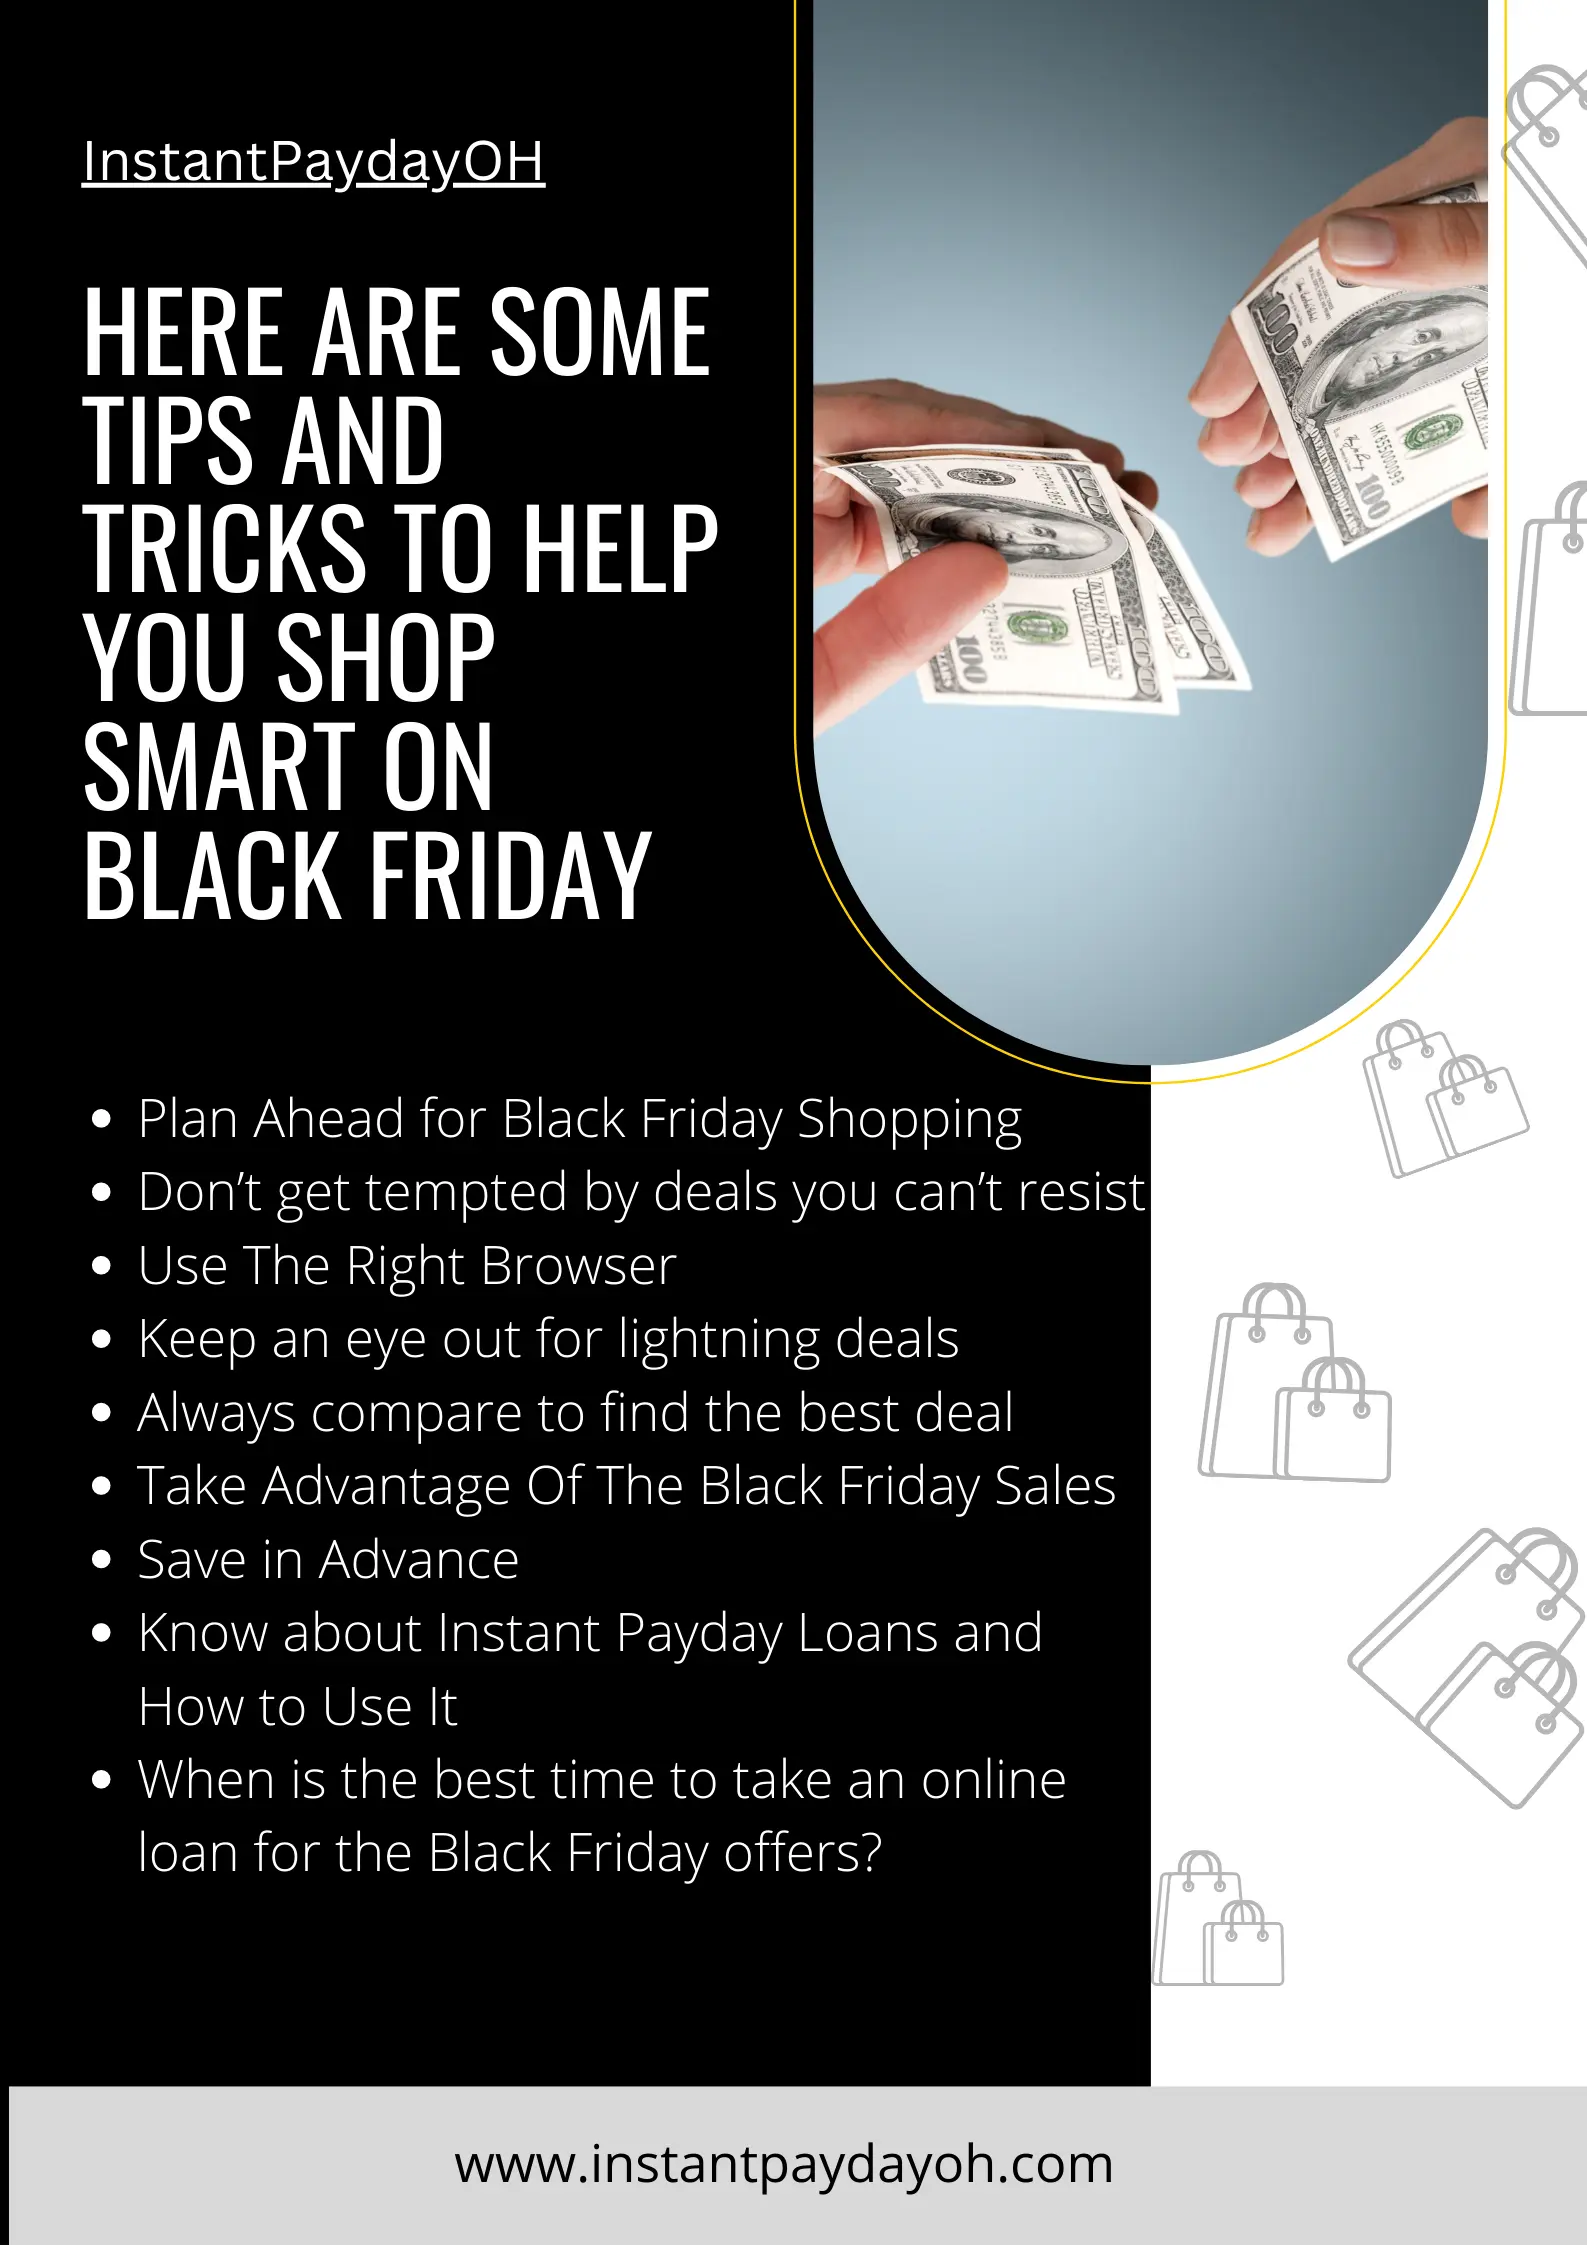 Here are some tips and tricks to help you shop smart on Black Friday